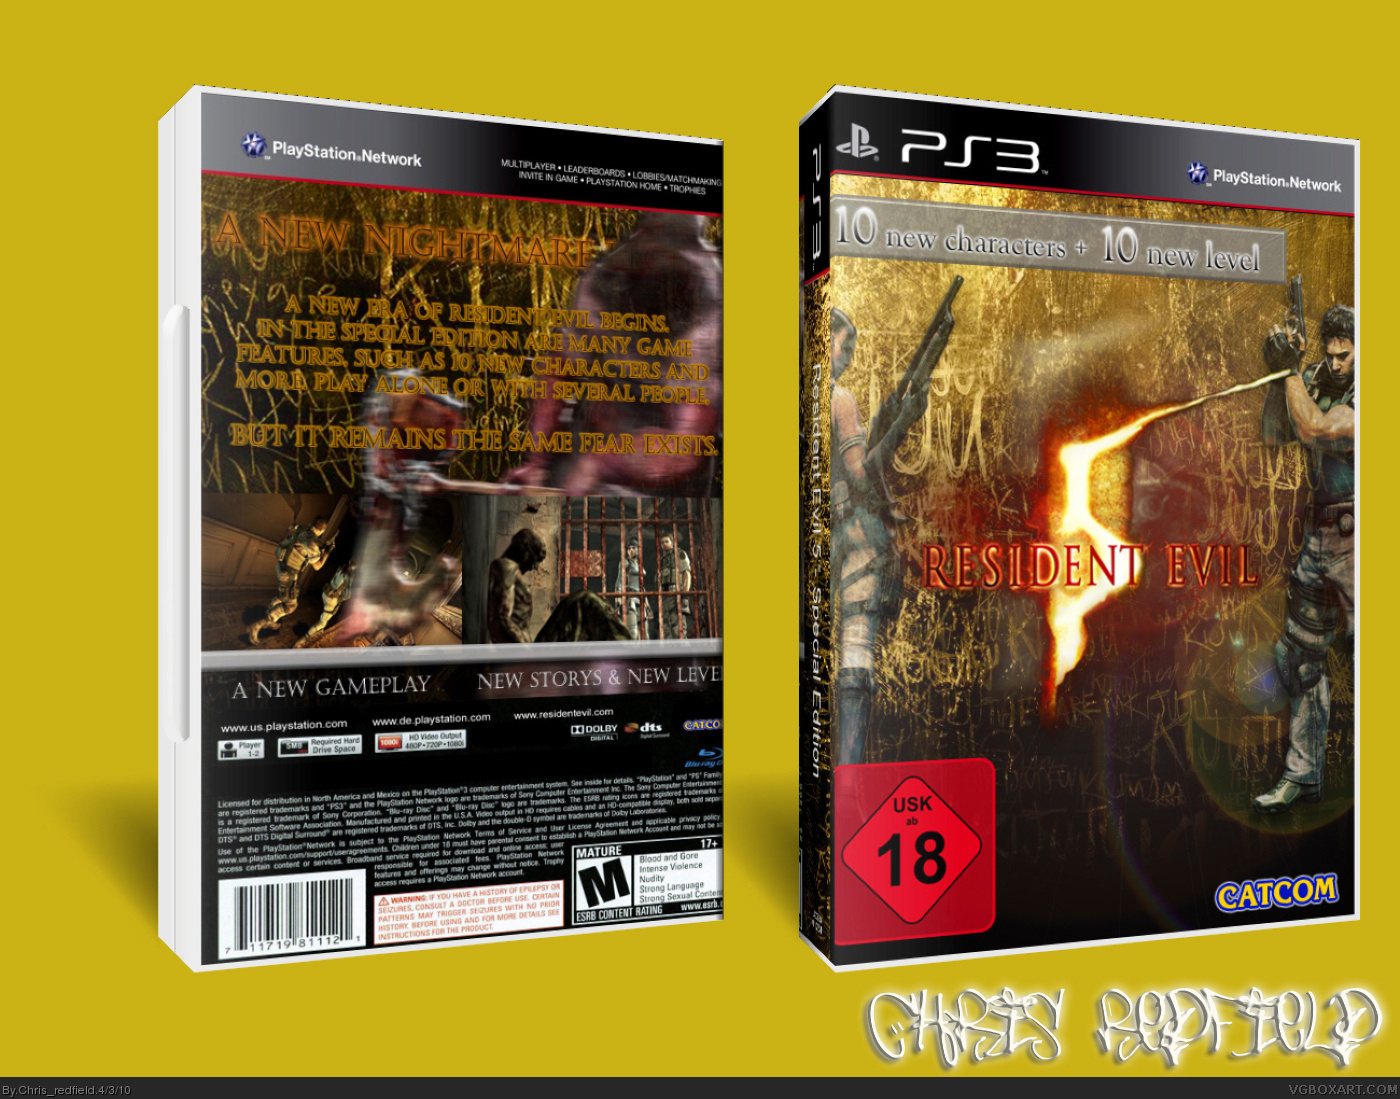 Resident Evil 5 - Special Edition box cover